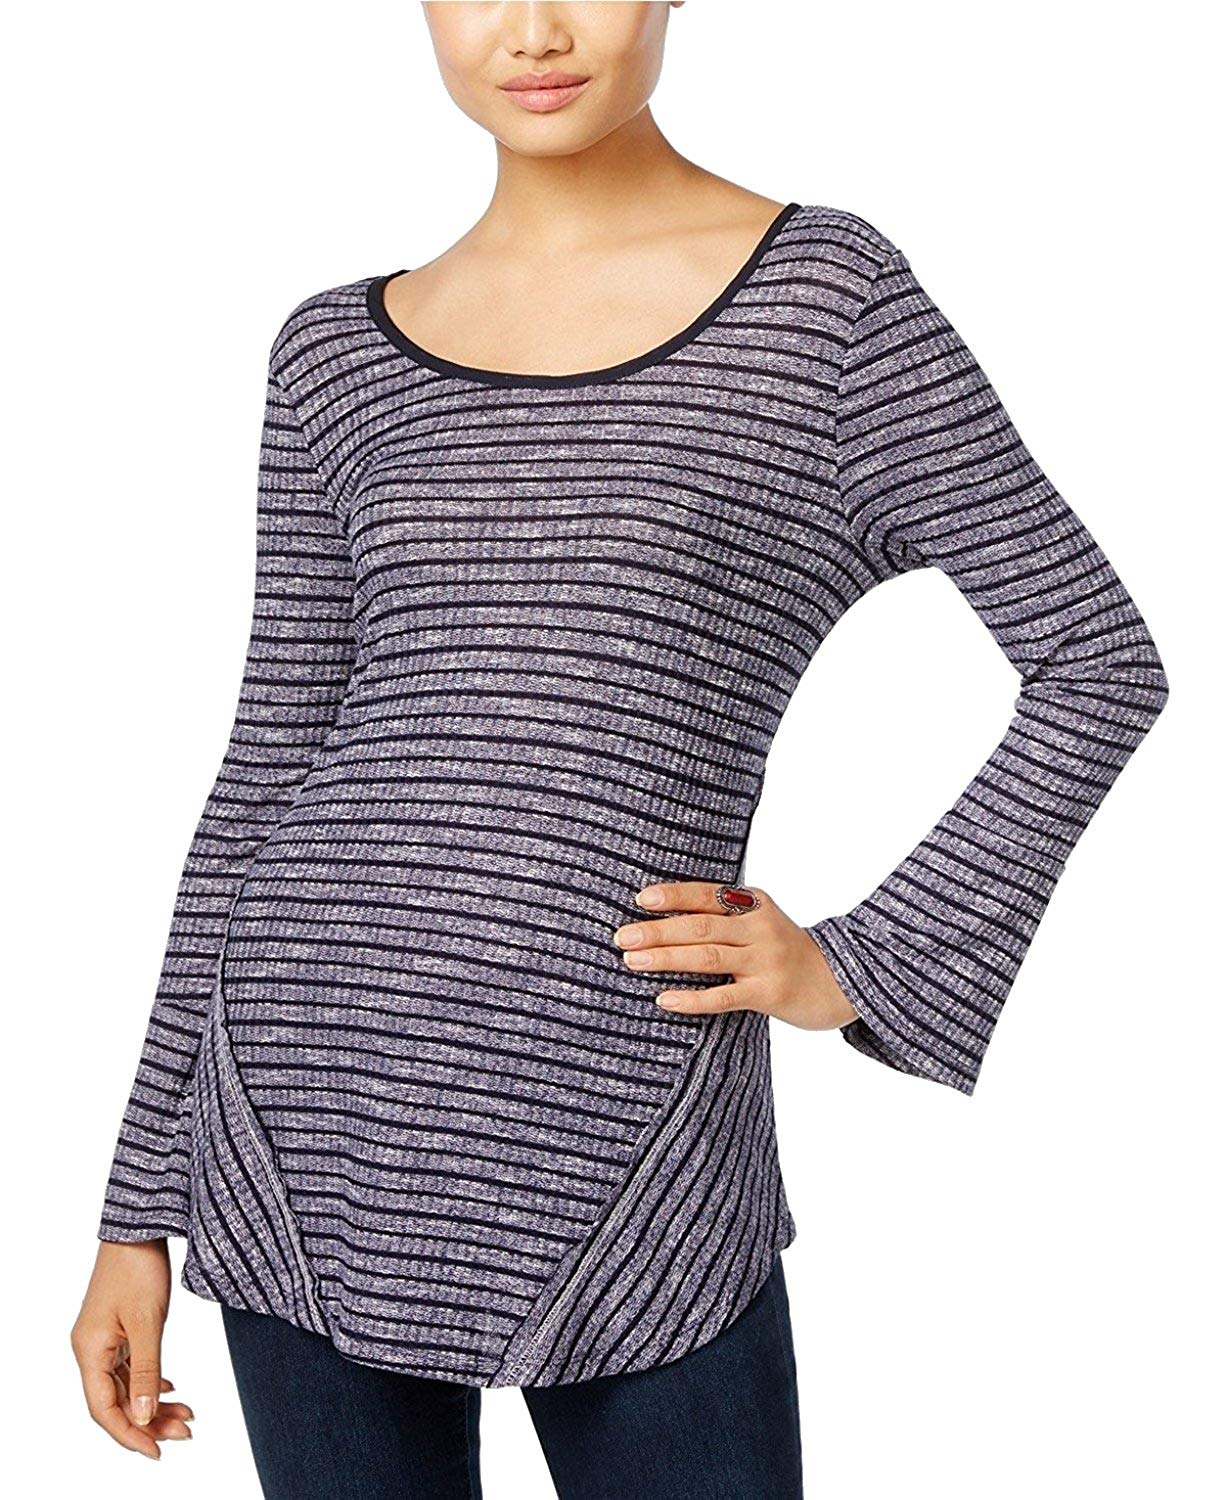 Style & Co. Petite Striped Bell-Sleeve Top Navy Stripe PS